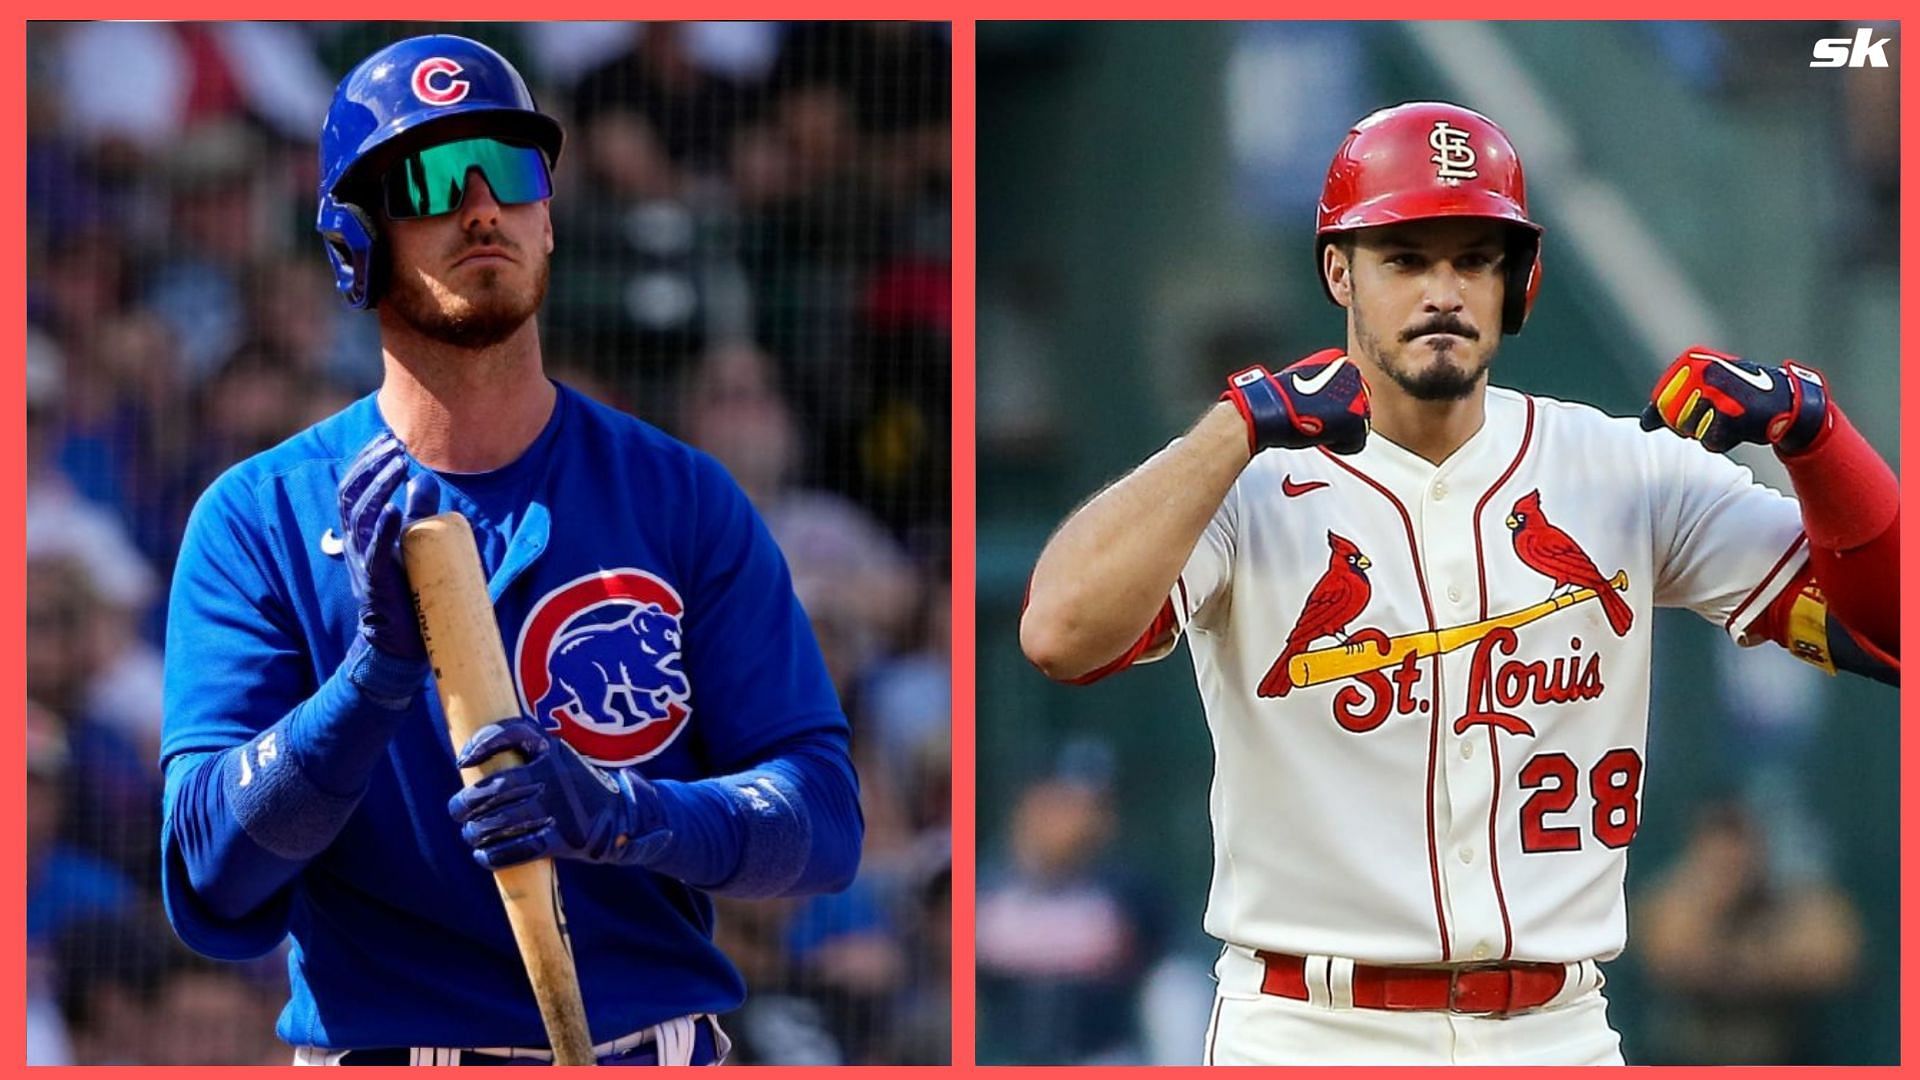 How to Watch the Cardinals vs. Cubs Game: Streaming & TV Info